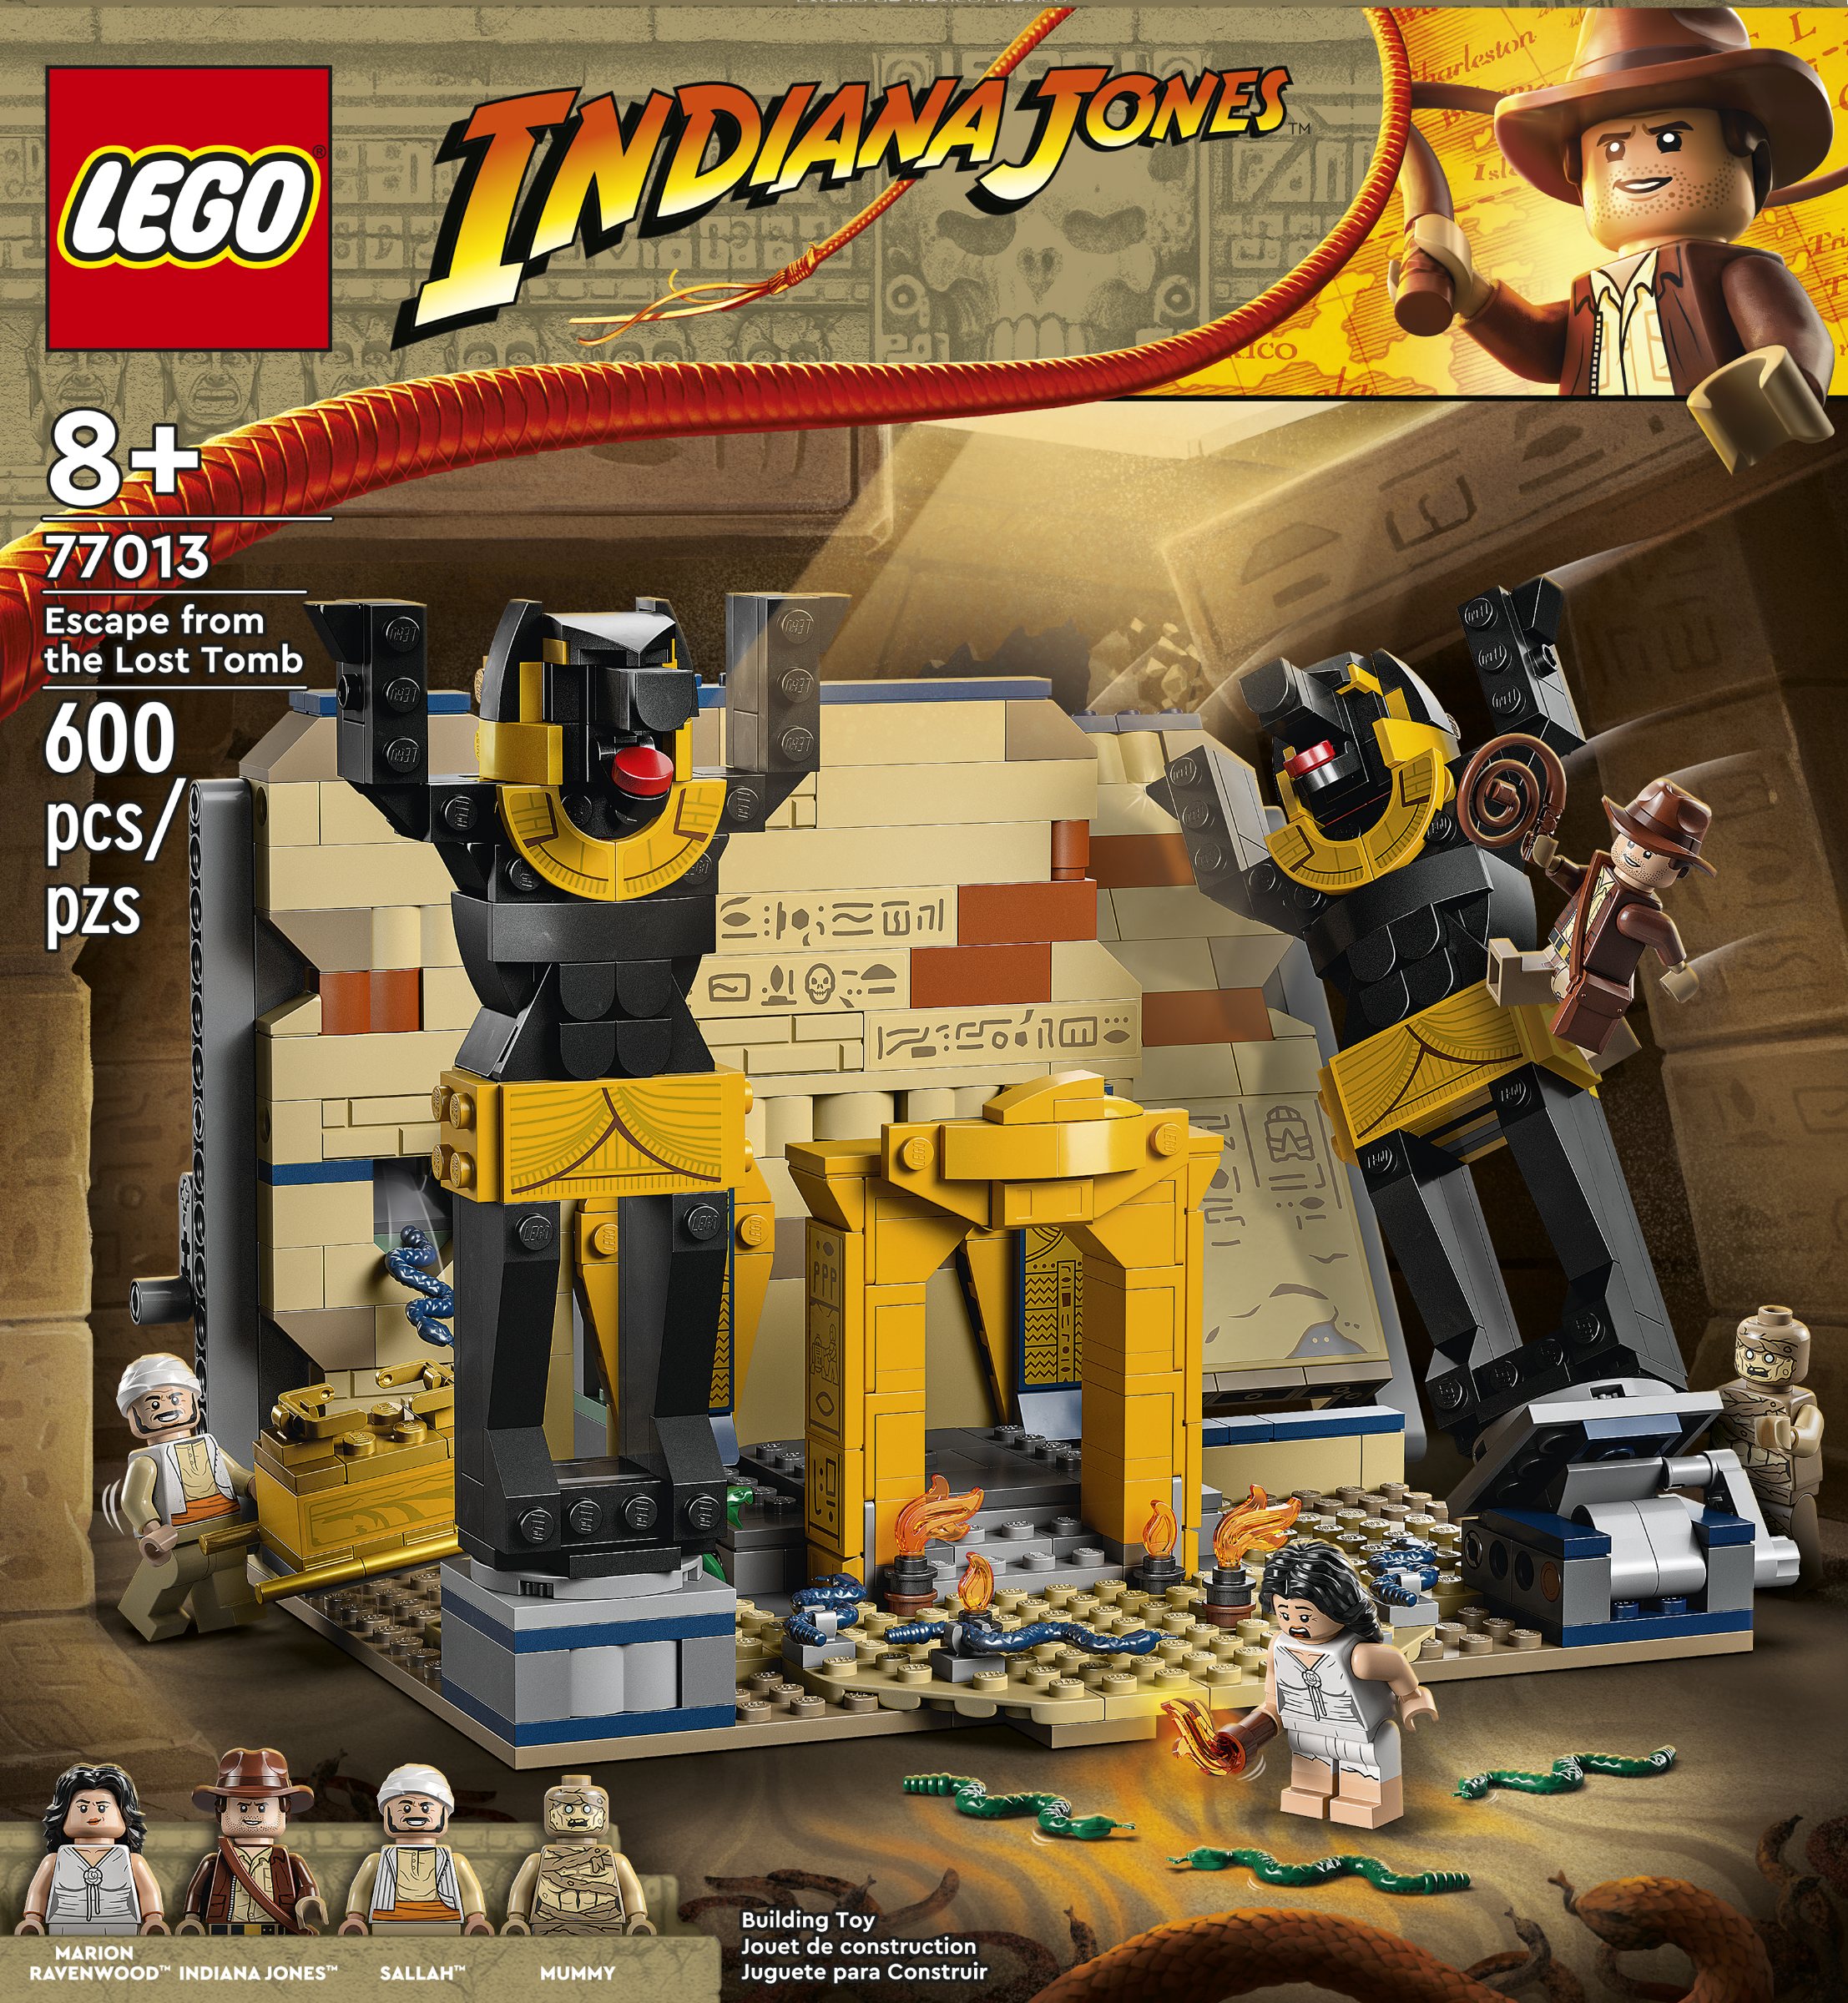 Lego launches Indiana Jones sets, but cans brick-built Temple of Doom